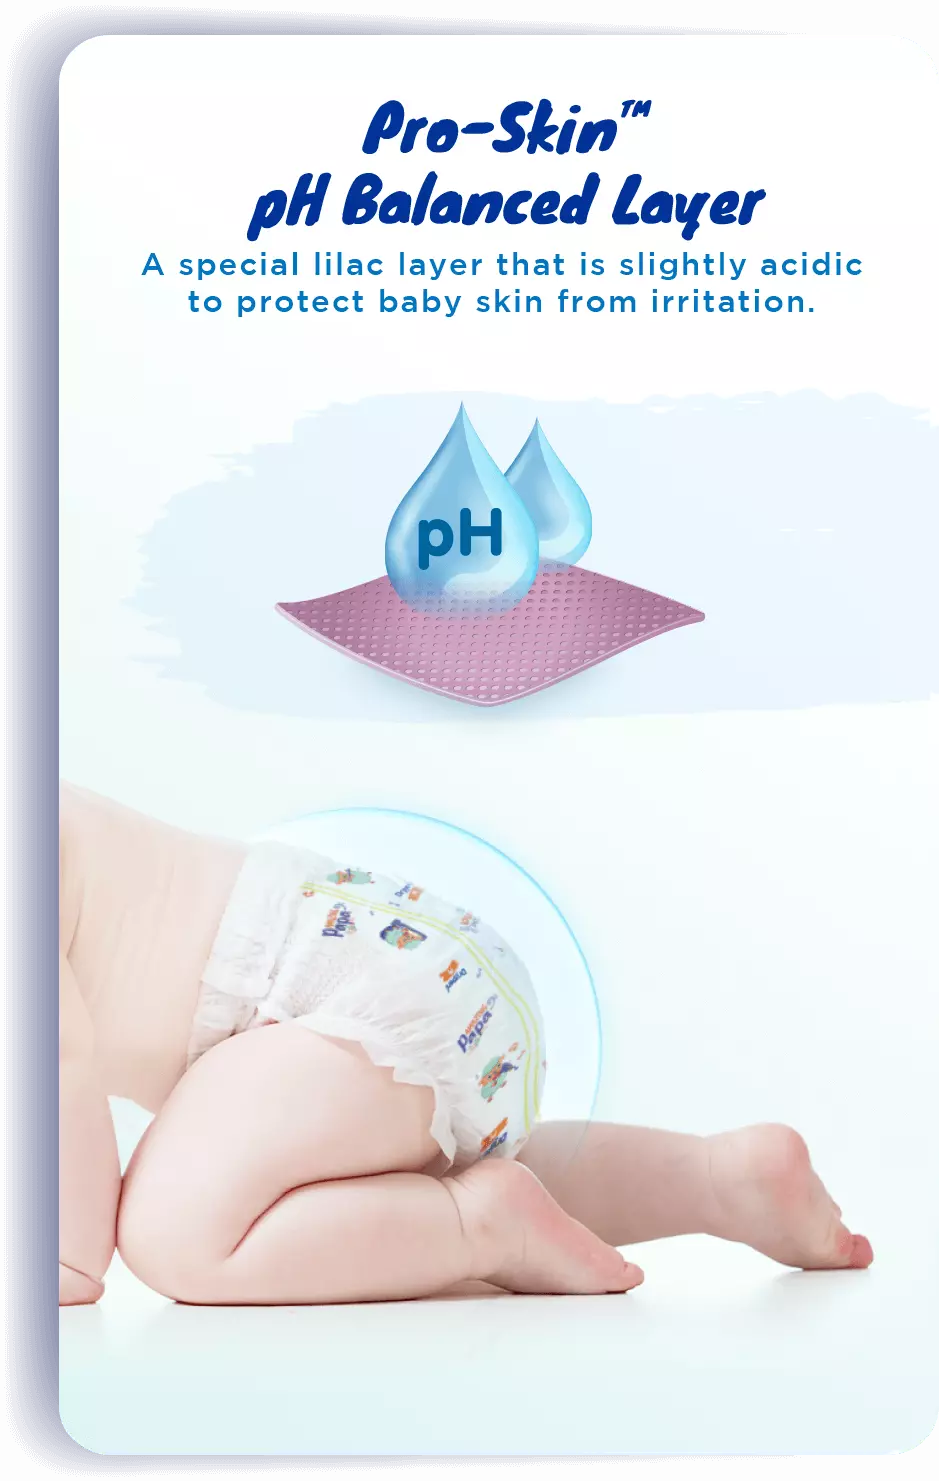 Pro-Skin™ pH Balanced Layer: A special lilac layer that is slightly acidic to protect baby skin from irritation.